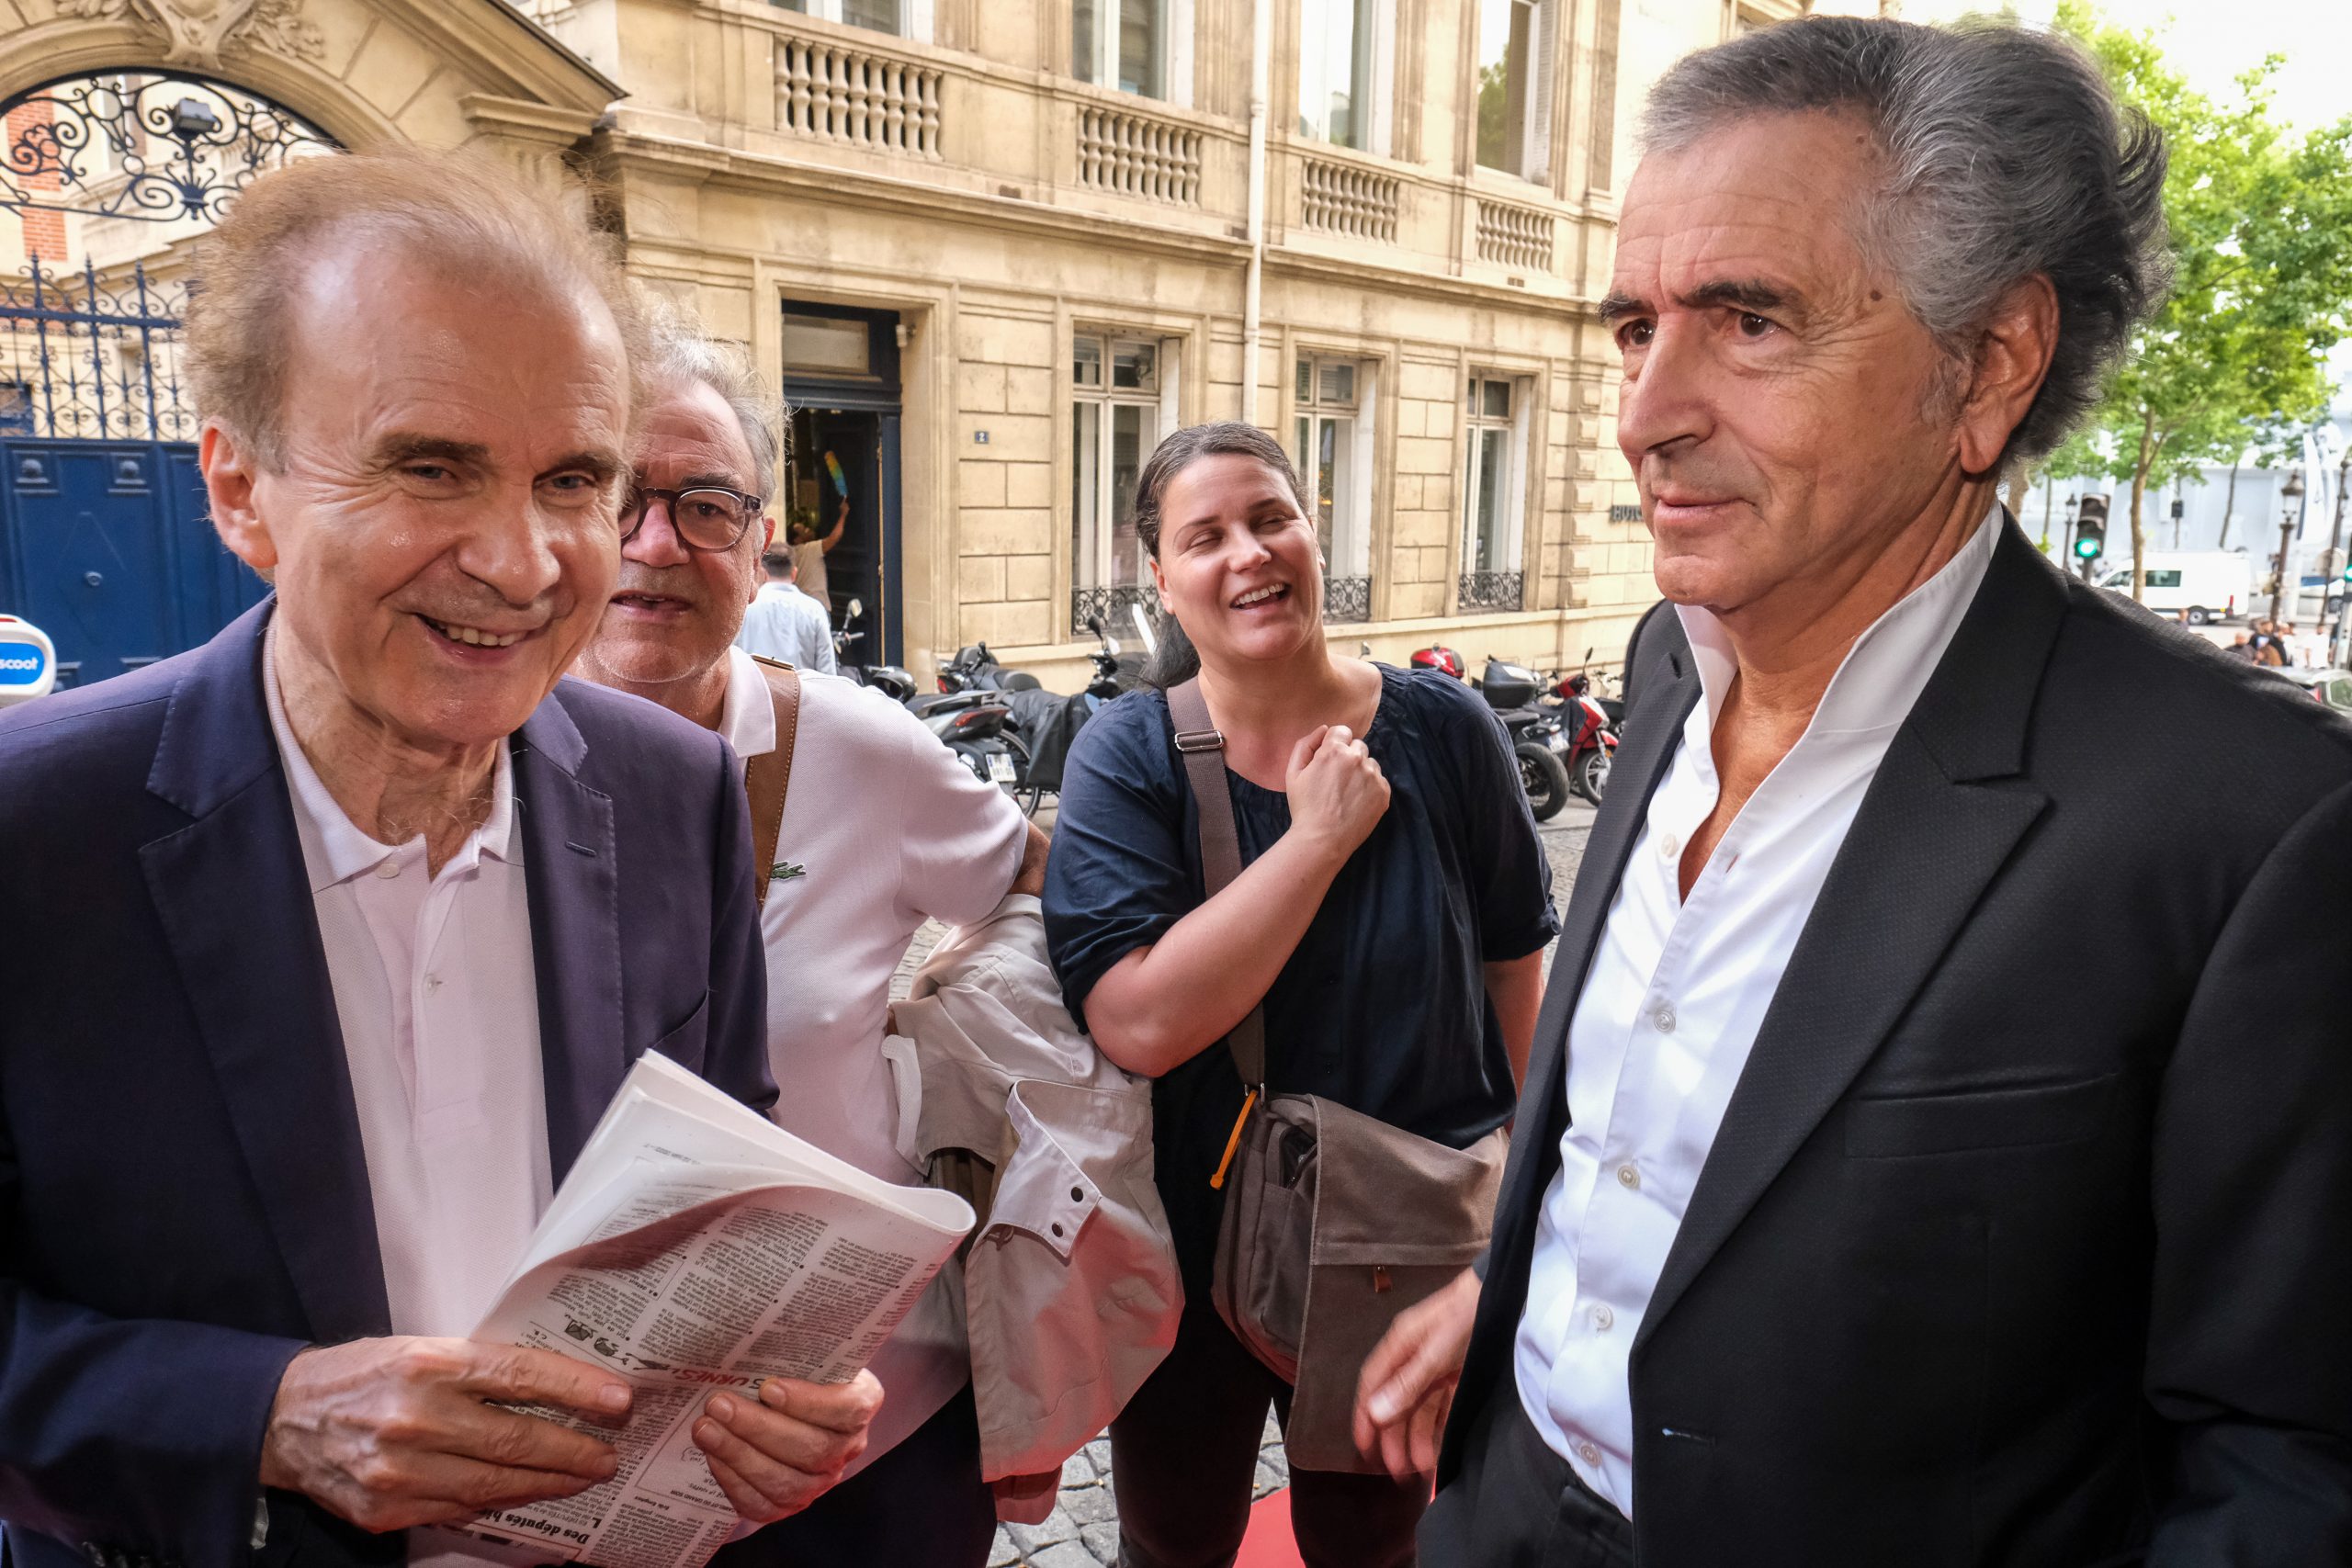 Bernard-Henri Lévy and Kendal Nezan, during the preview of BHL's film "Why Ukraine", at the Cinéma Le Balzac in Paris.